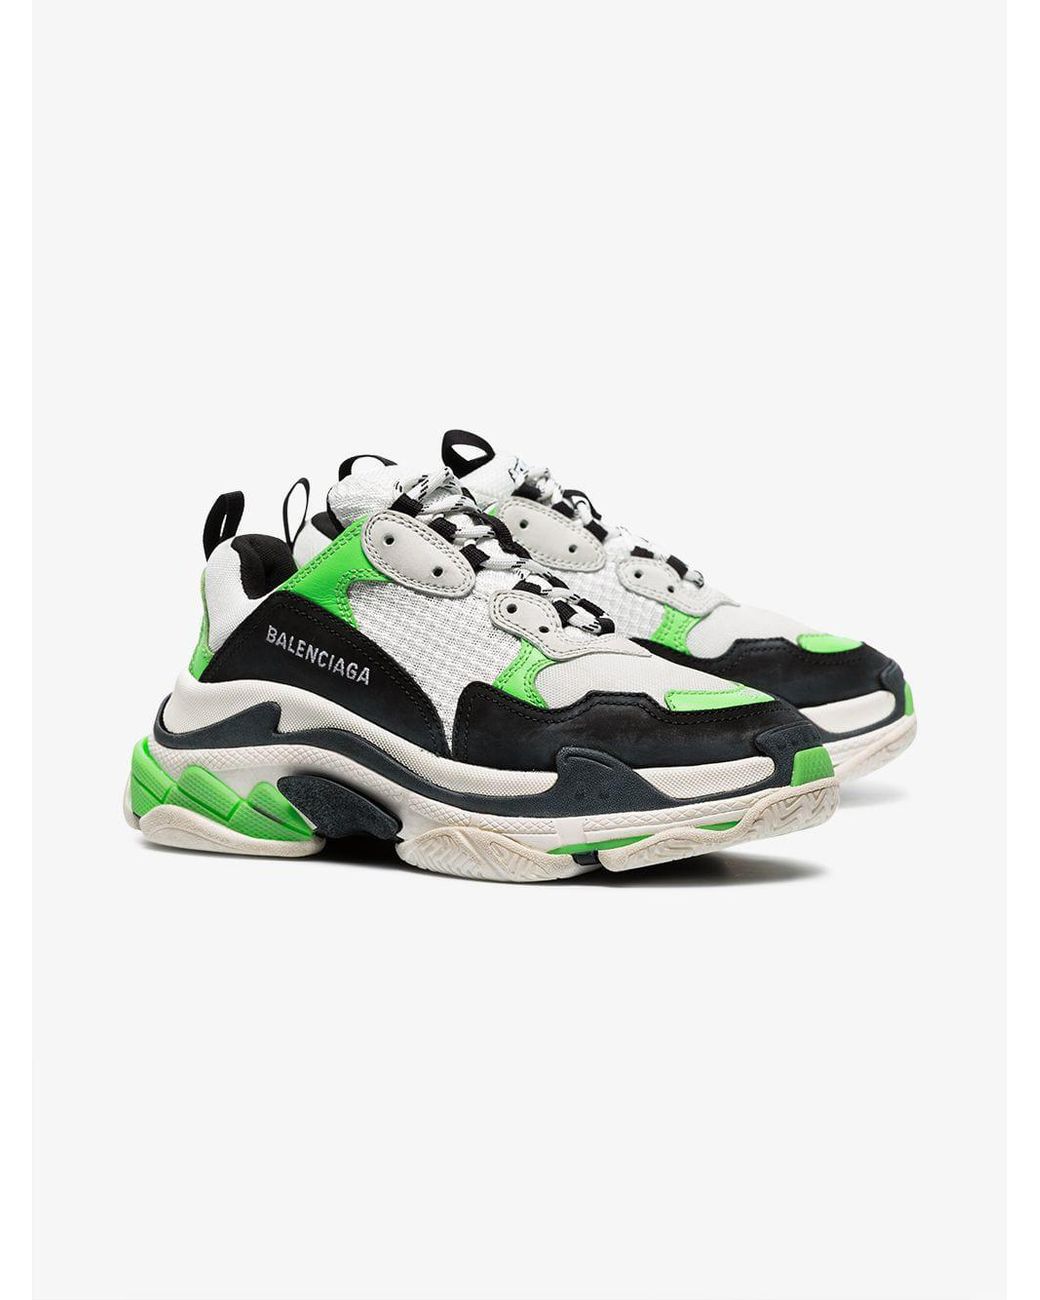 Balenciaga Neon Green And Black Triple S Sneakers in White | Lyst